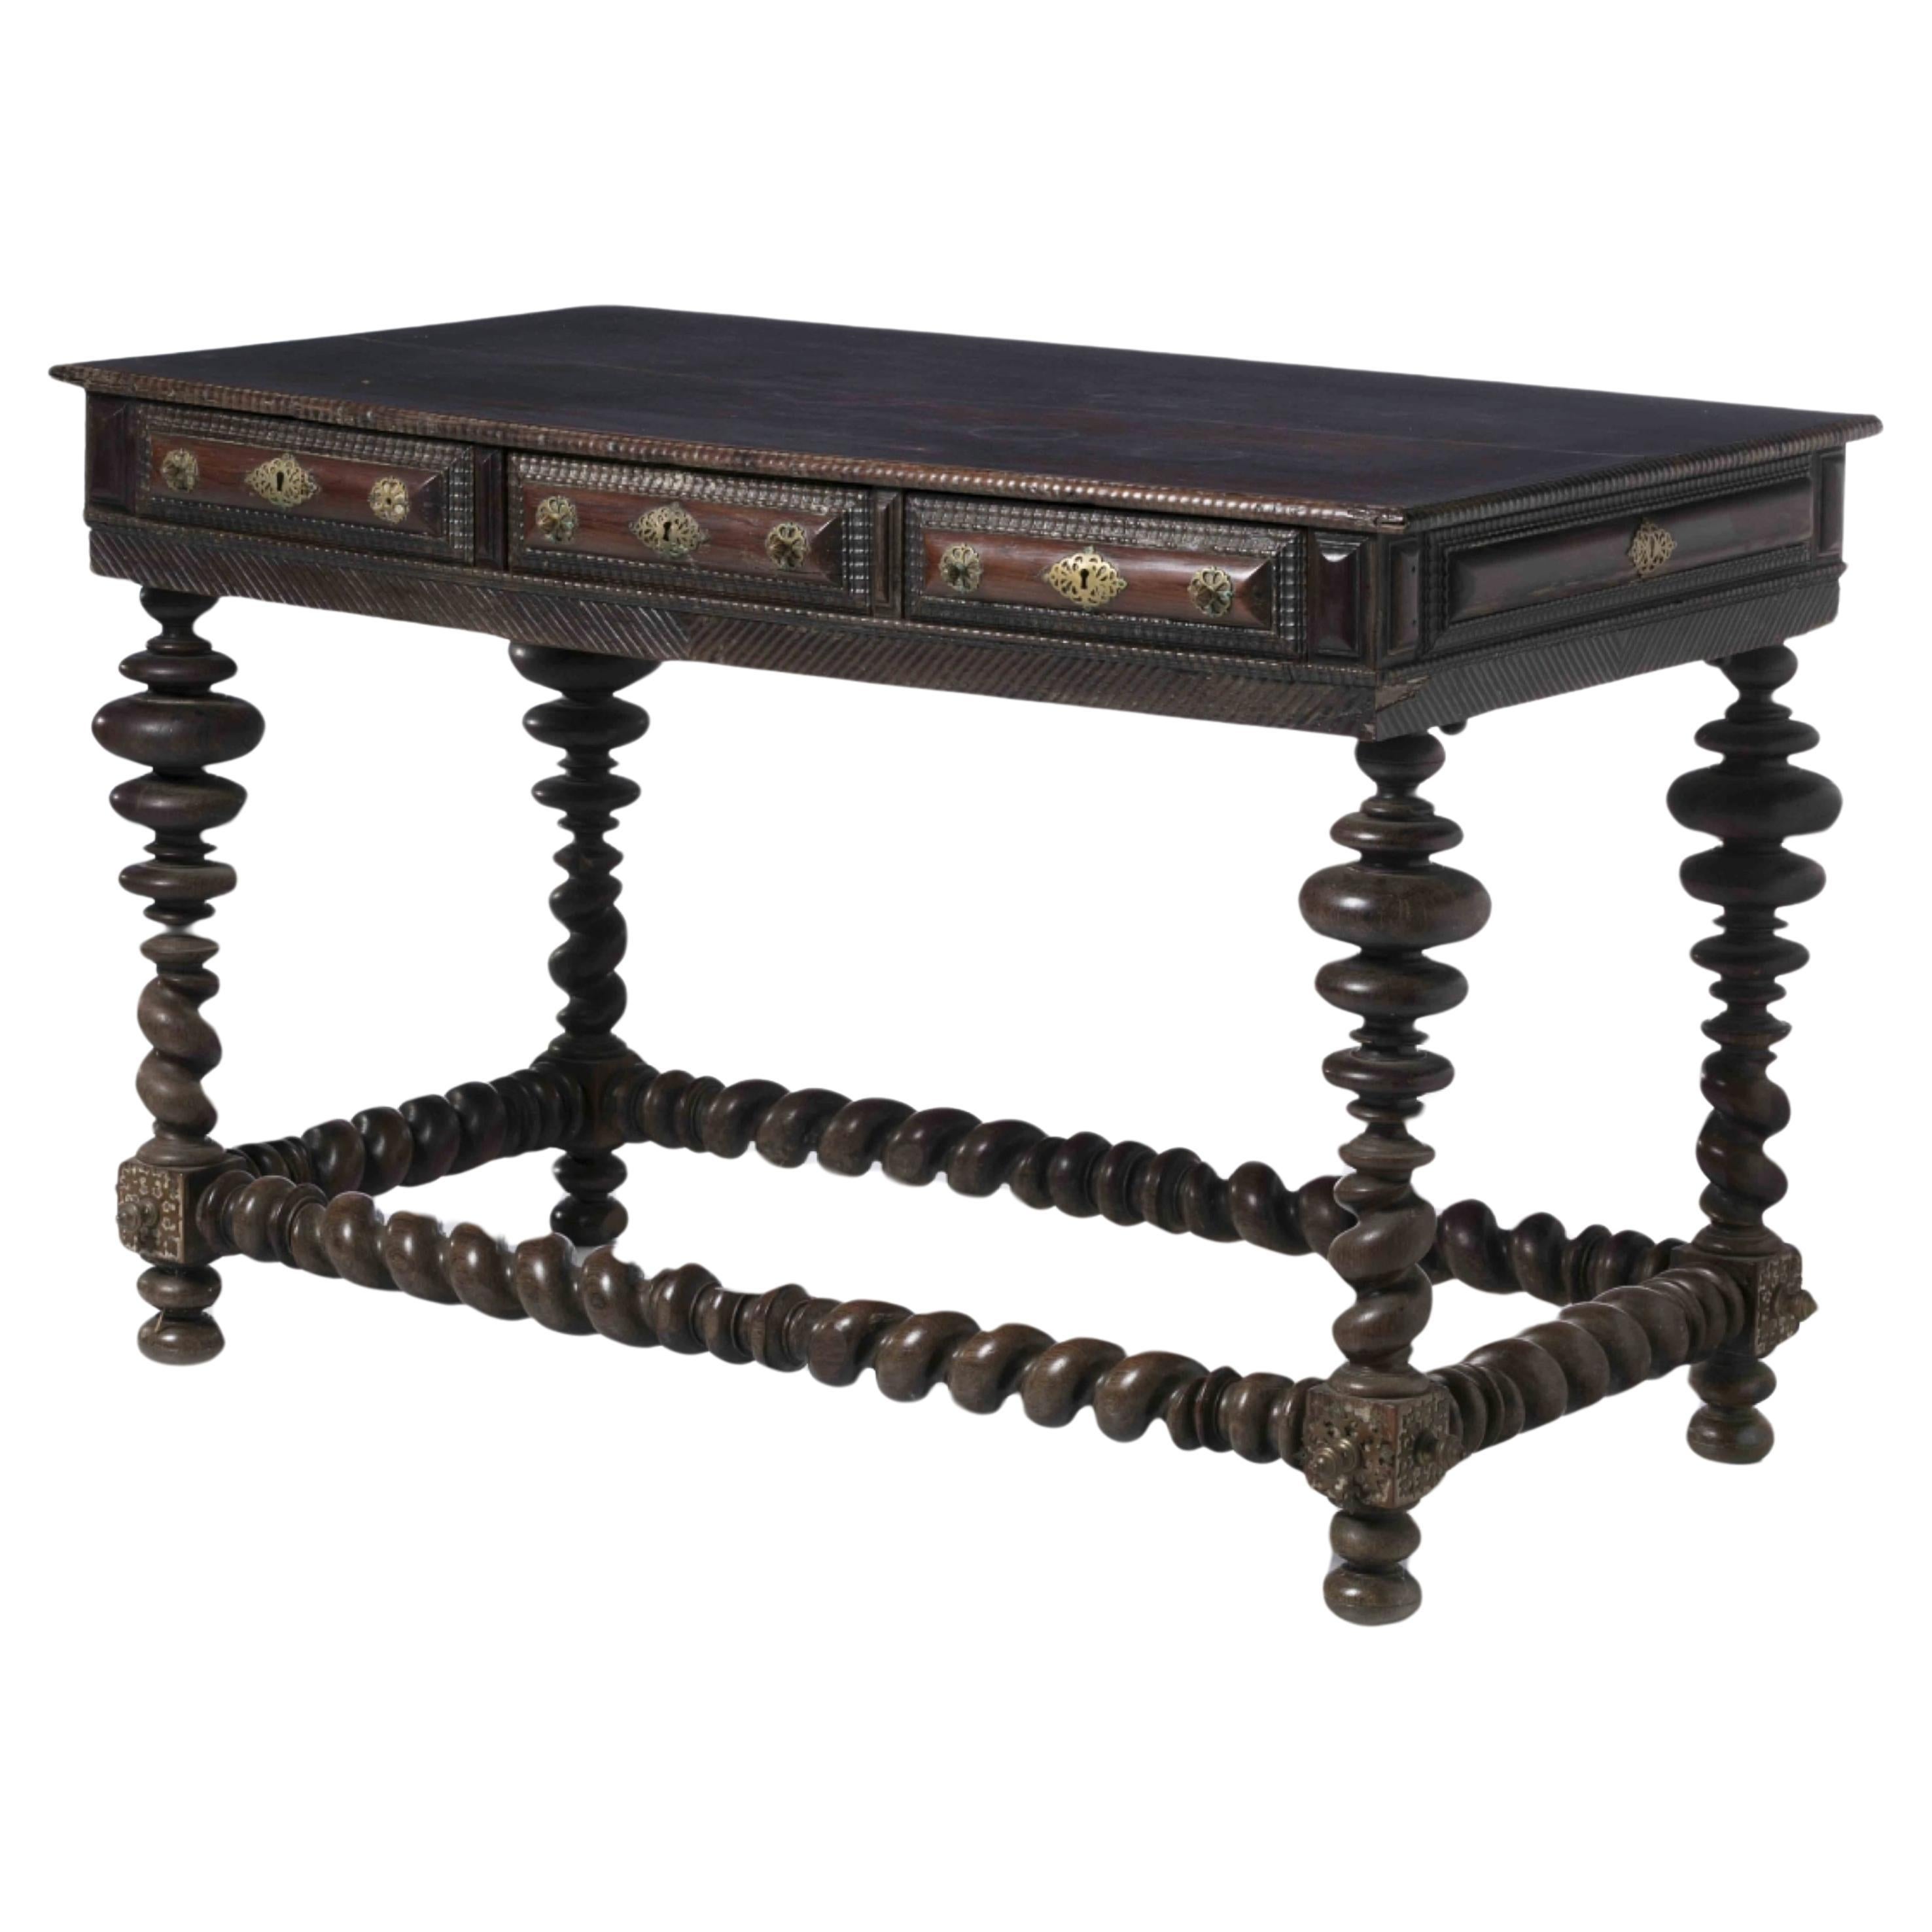 Important Portuguese Table 17th Century in Rosewood